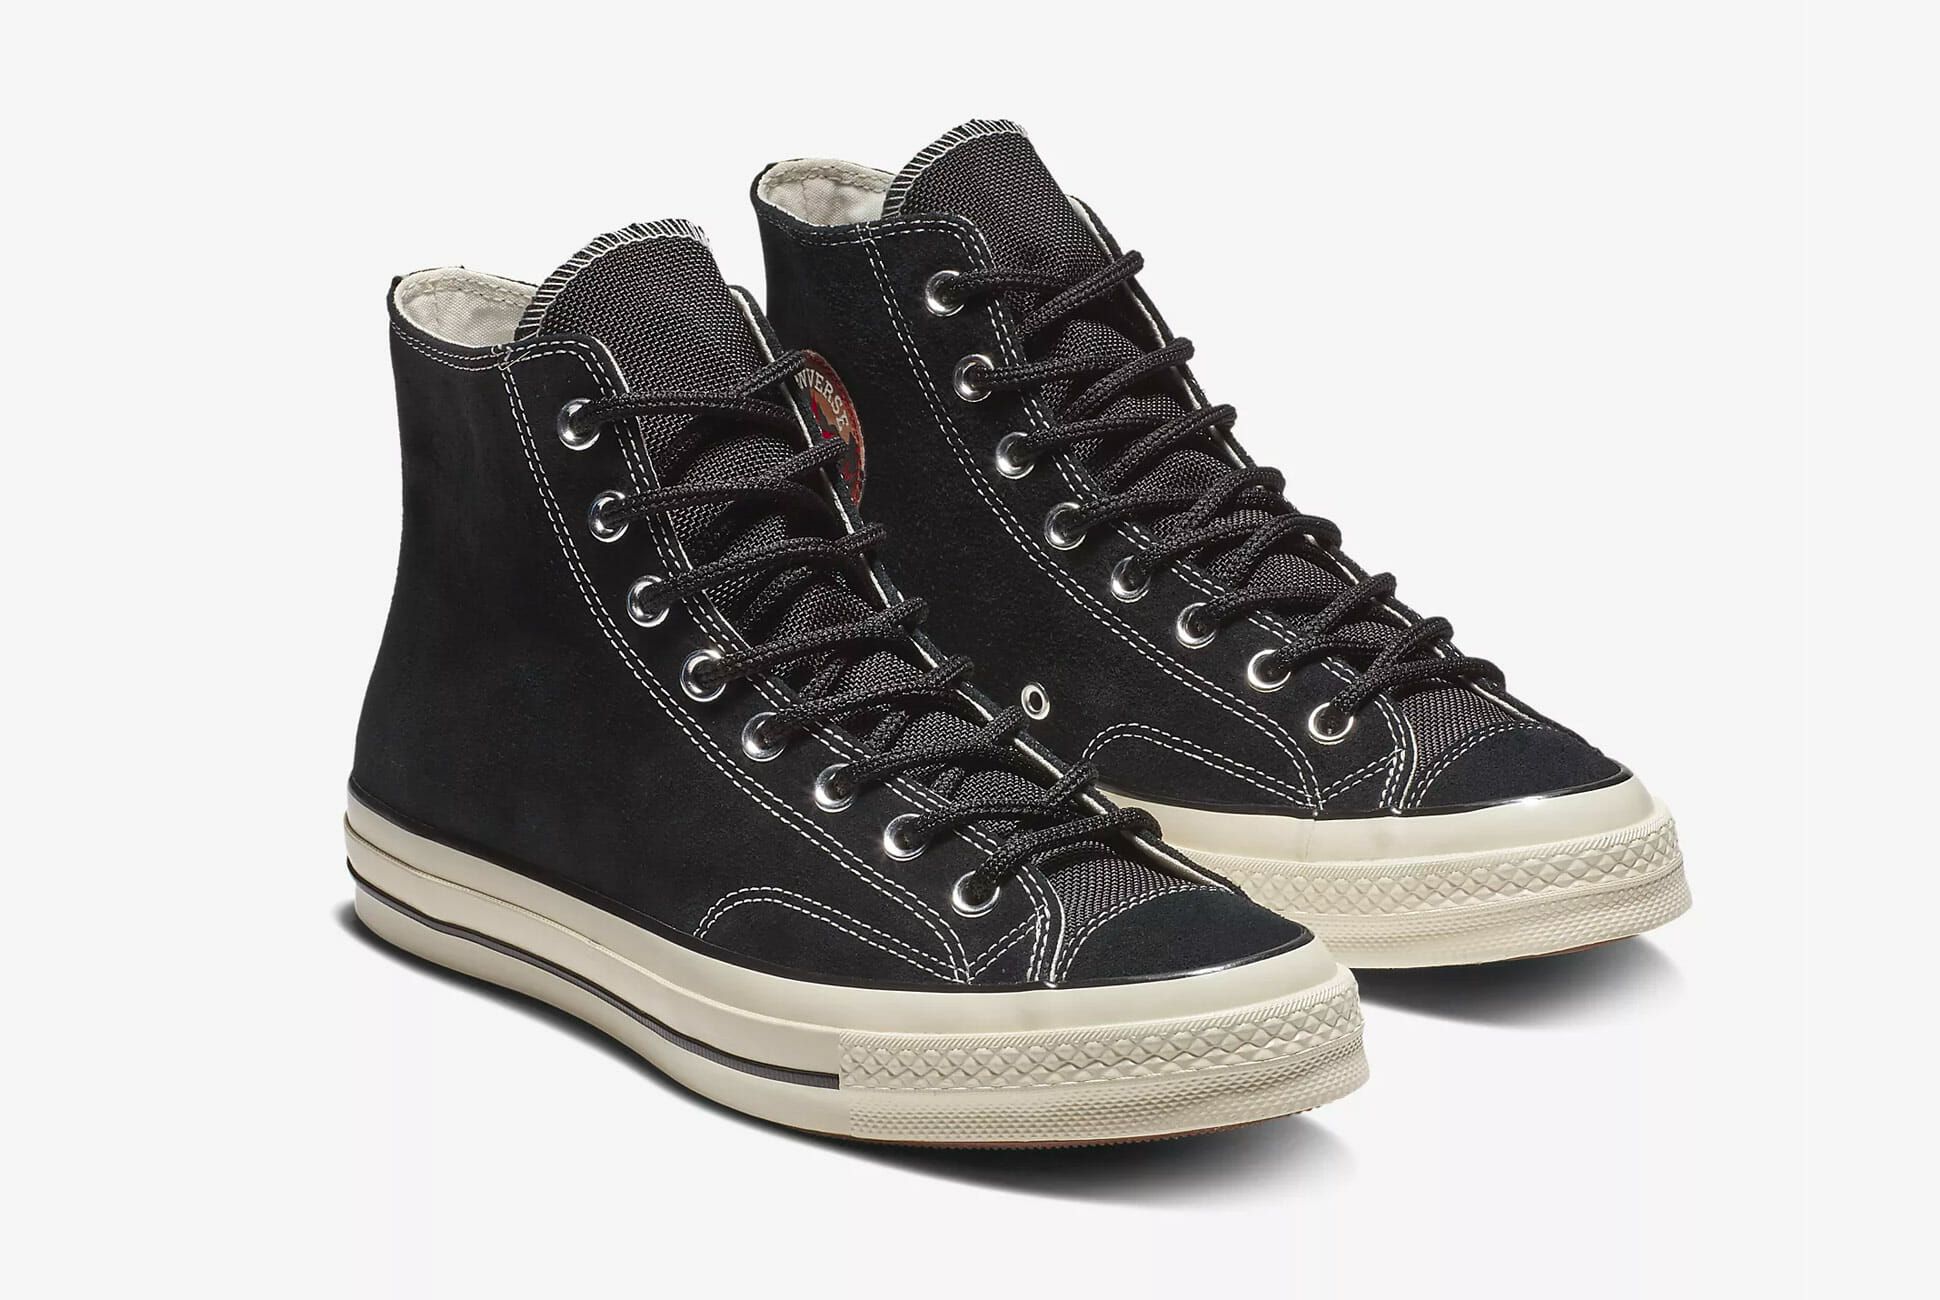 Converse Releases a New Suede Version 